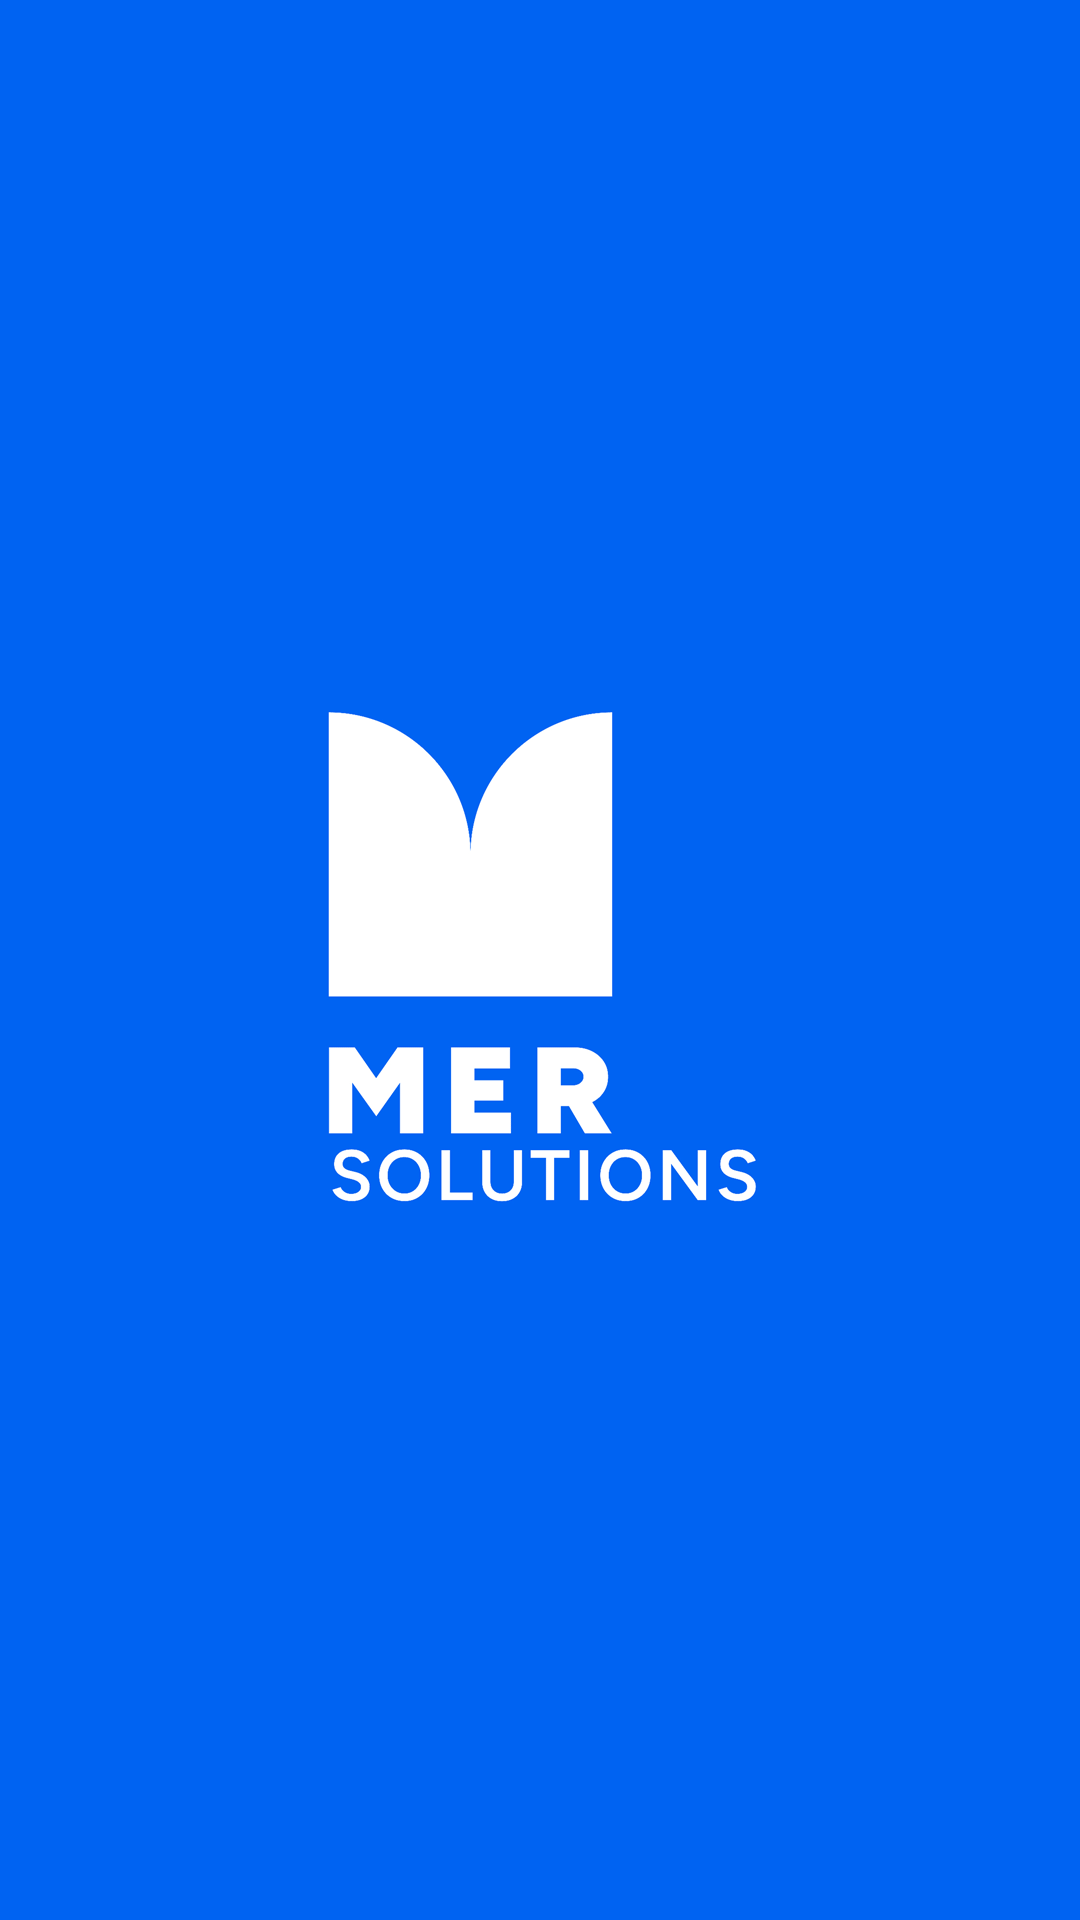 MERSolutions DynamicLogos 20230224 2